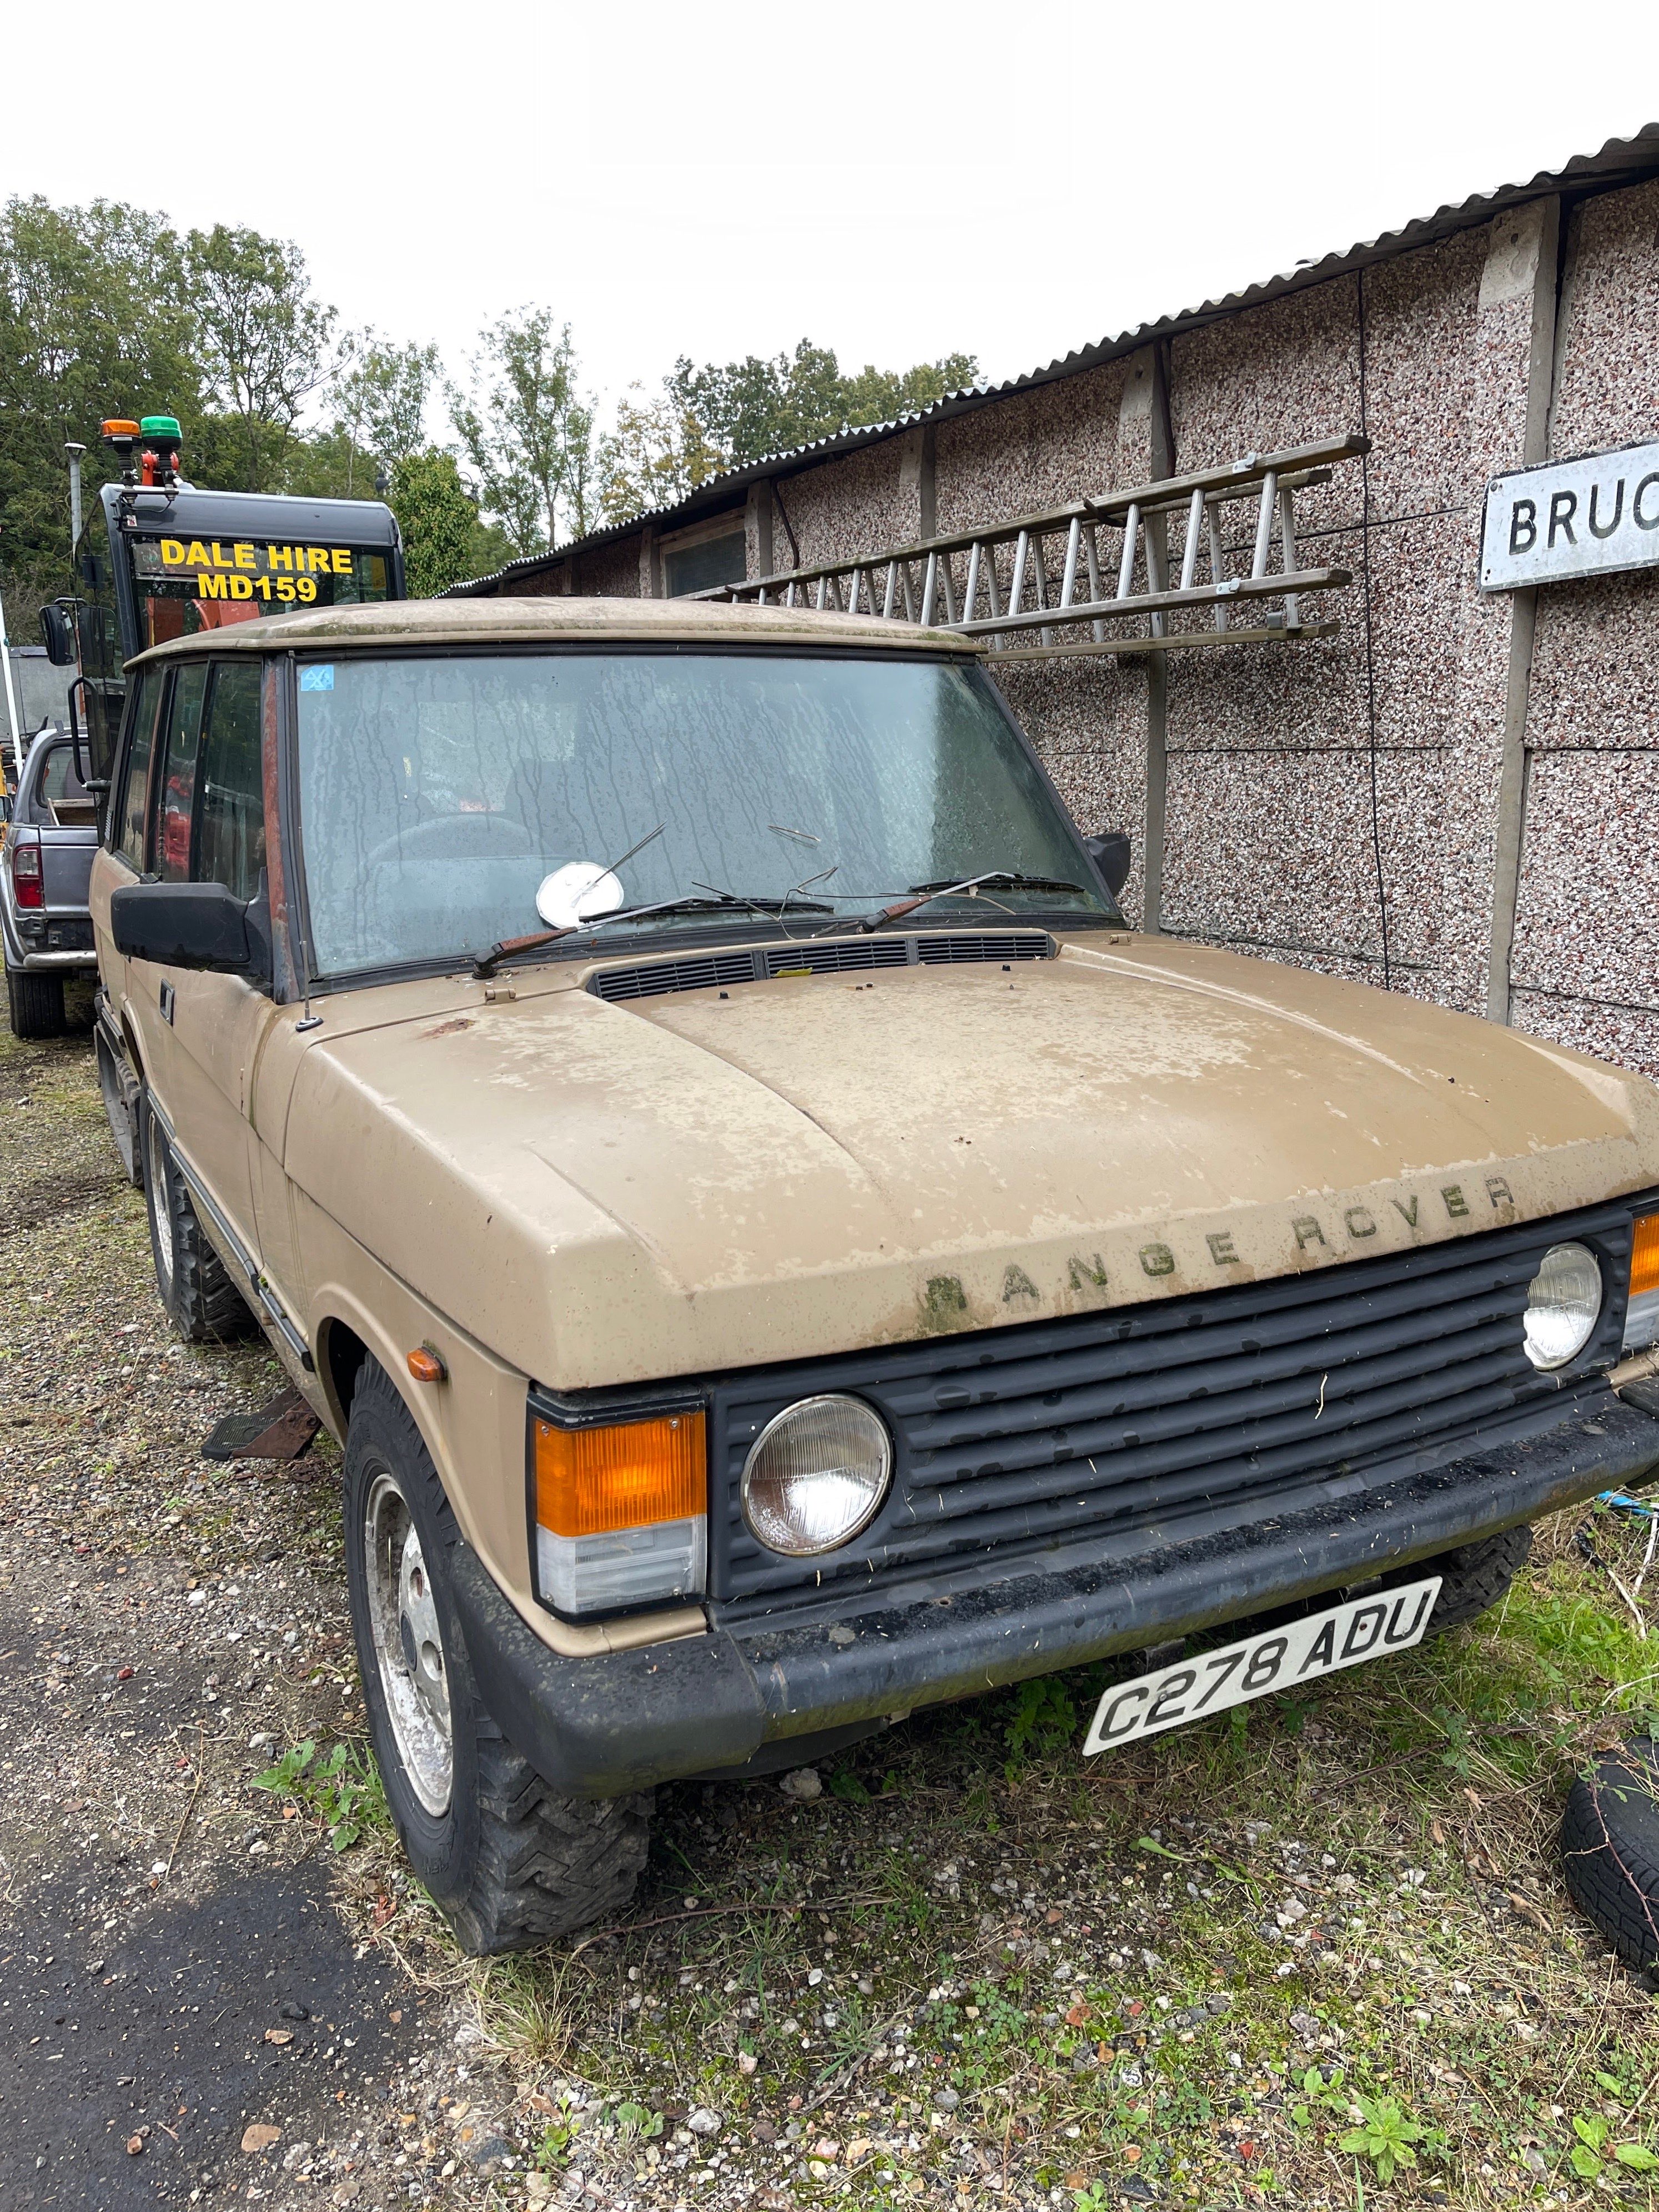 A vintage 2.5 diesel Range Rover with 129,200 miles on the clock.